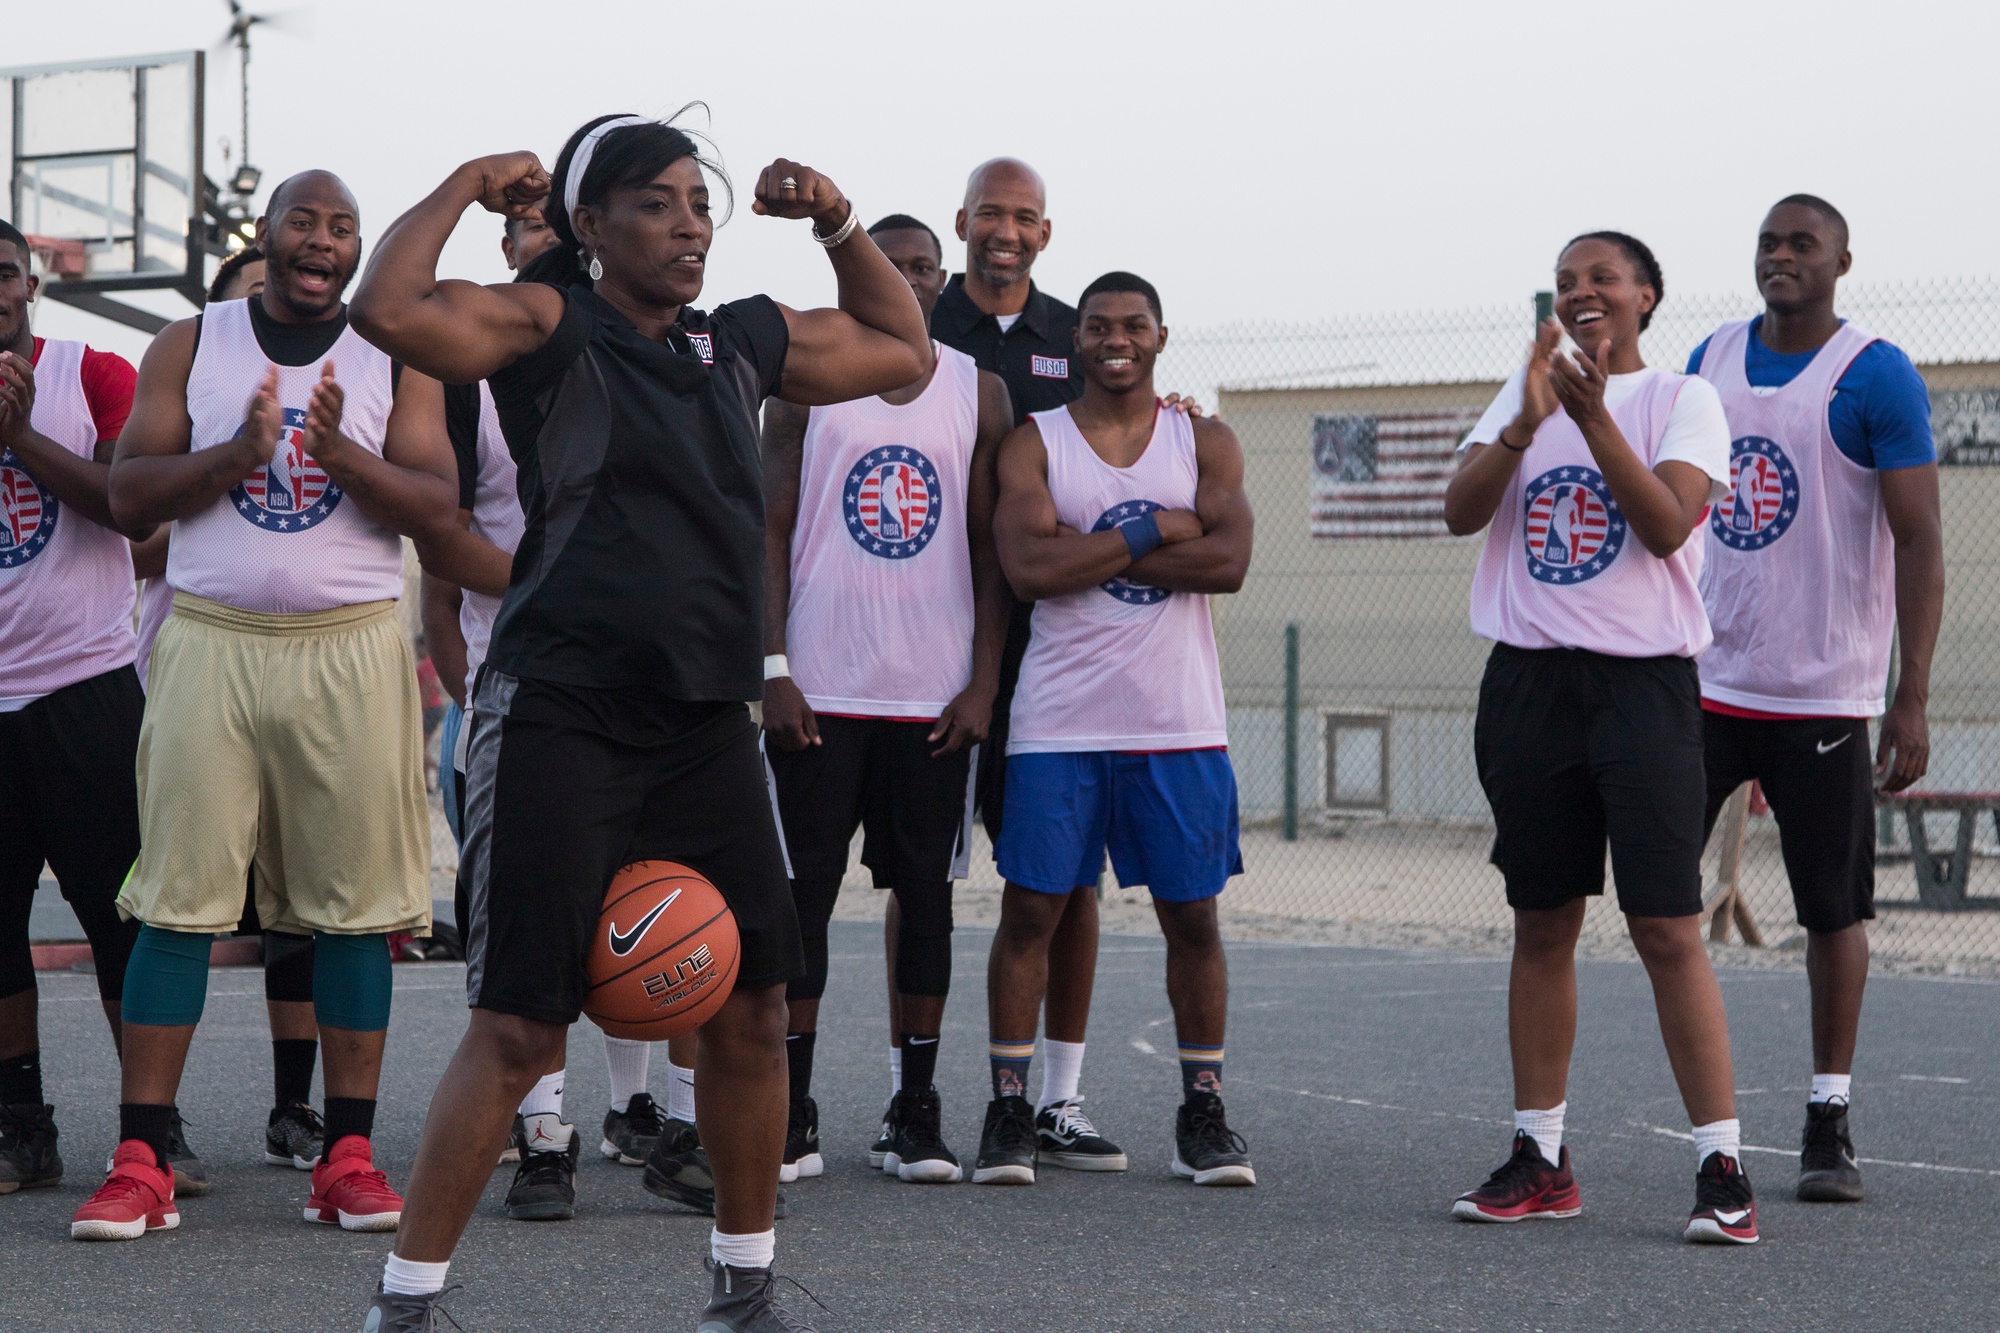 Images - NBA Cares Hoops for Troops Visit Service Members in Kuwait [Image  4 of 4] - DVIDS